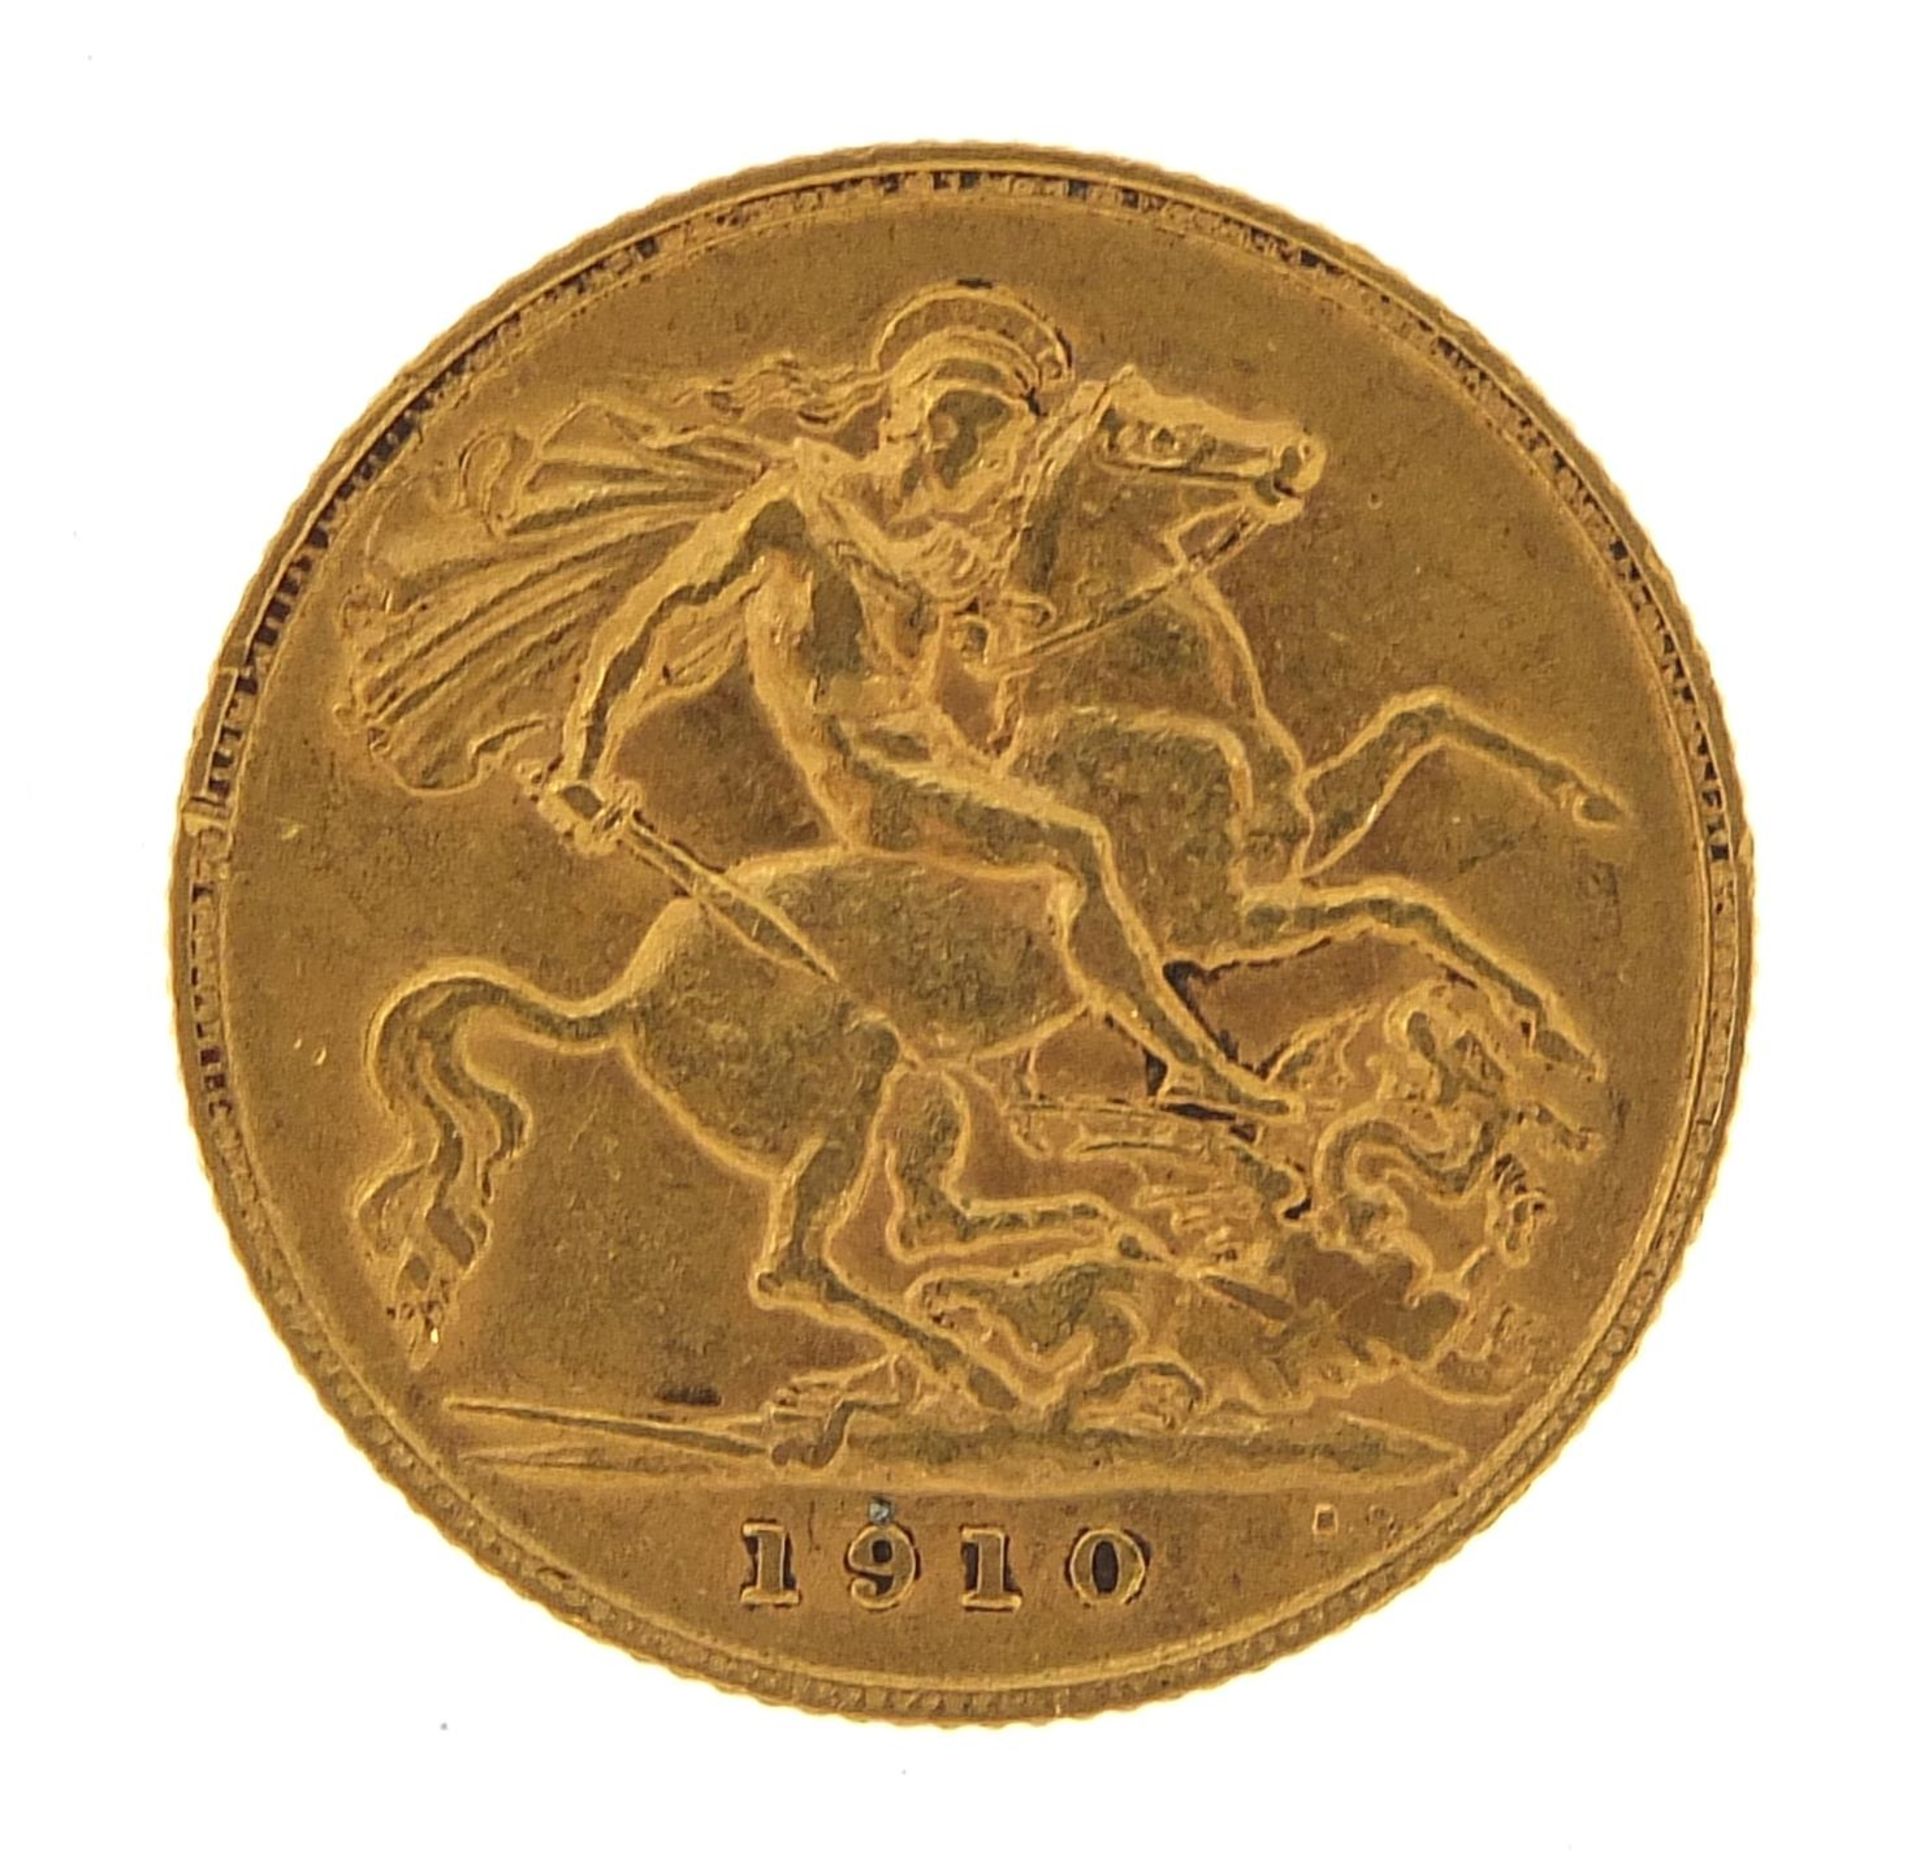 Edward VII 1910 gold half sovereign - this lot is sold without buyer's premium